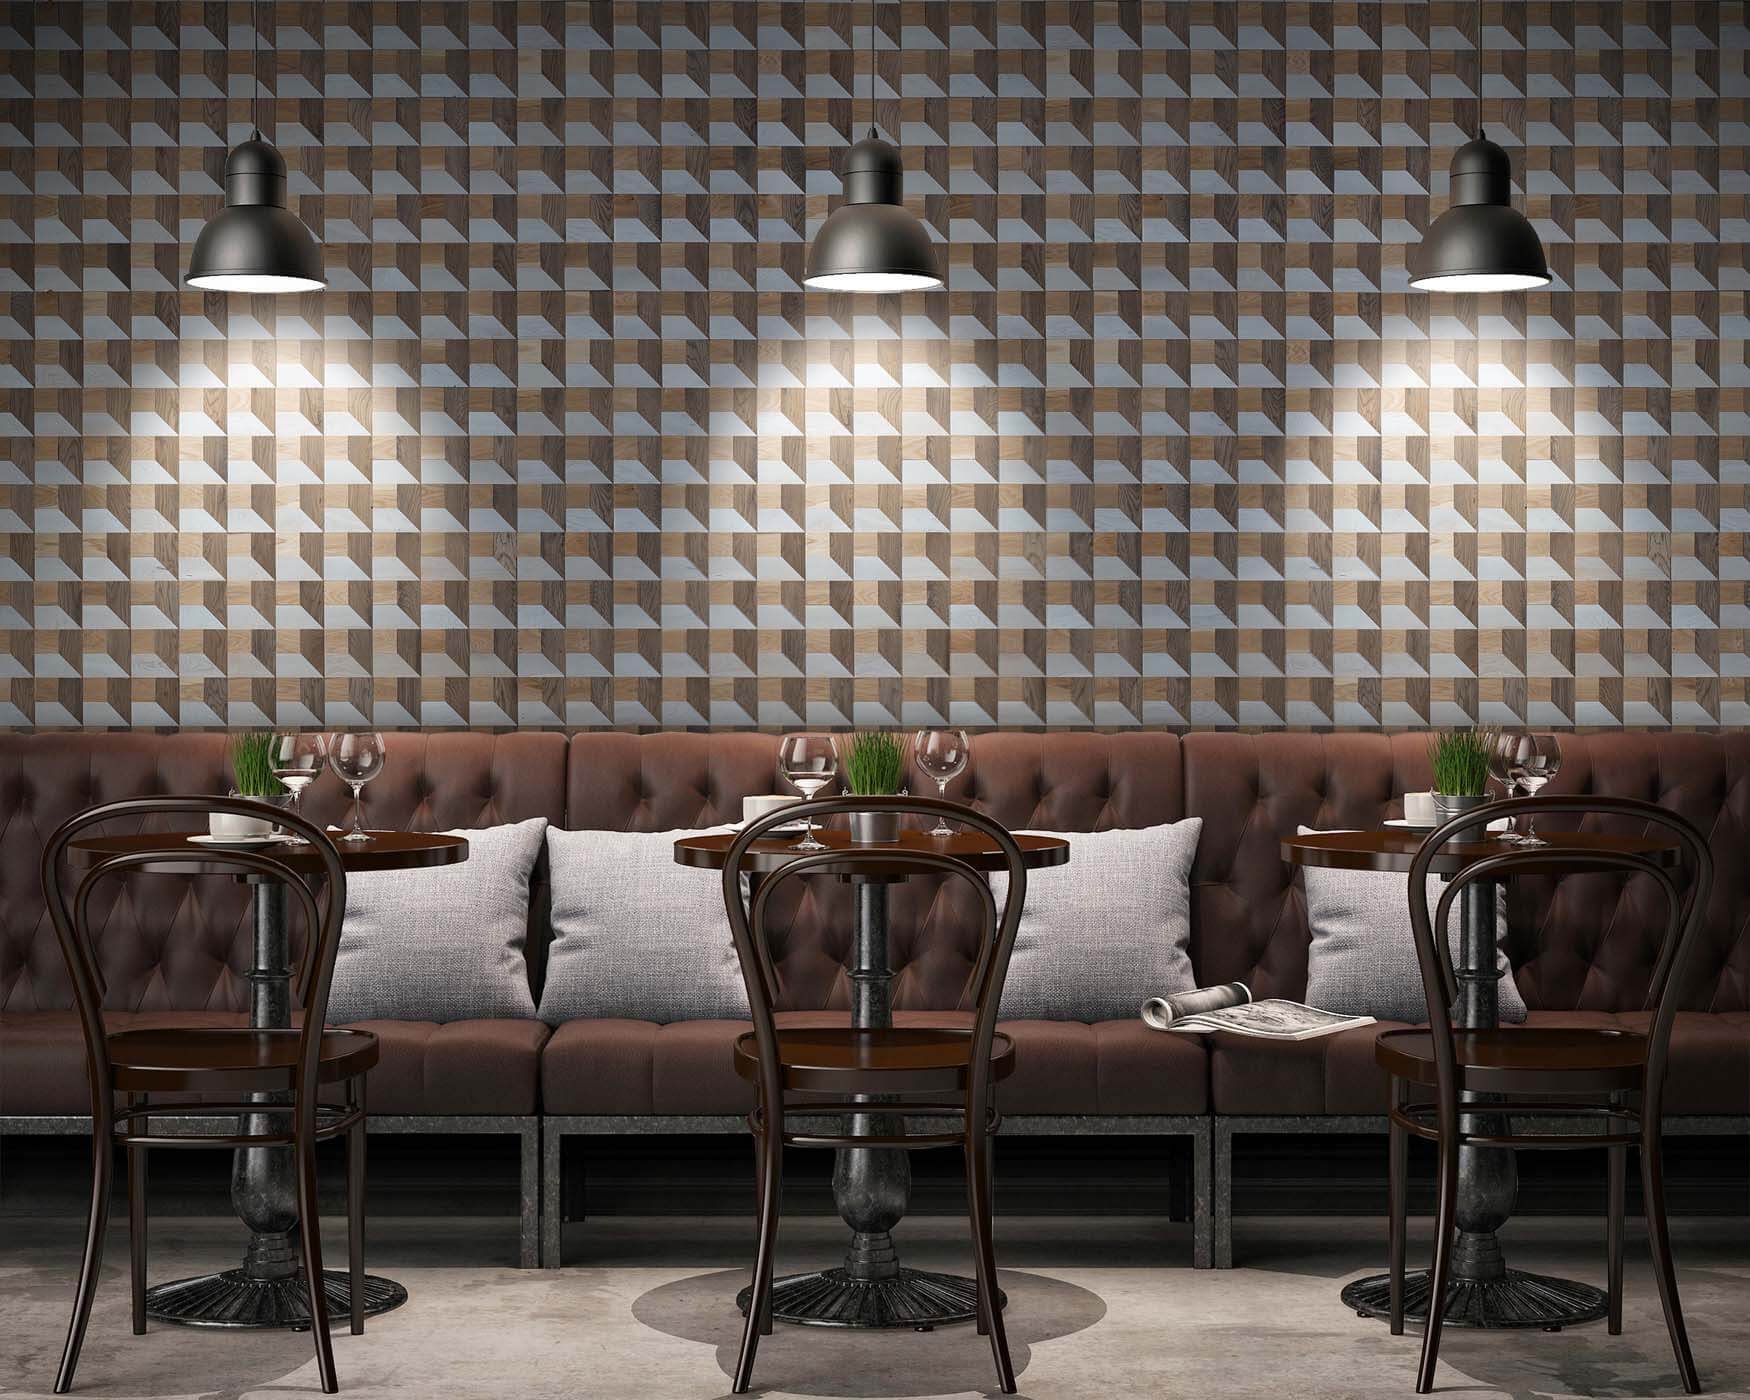 Decorative wall panels in restaurant